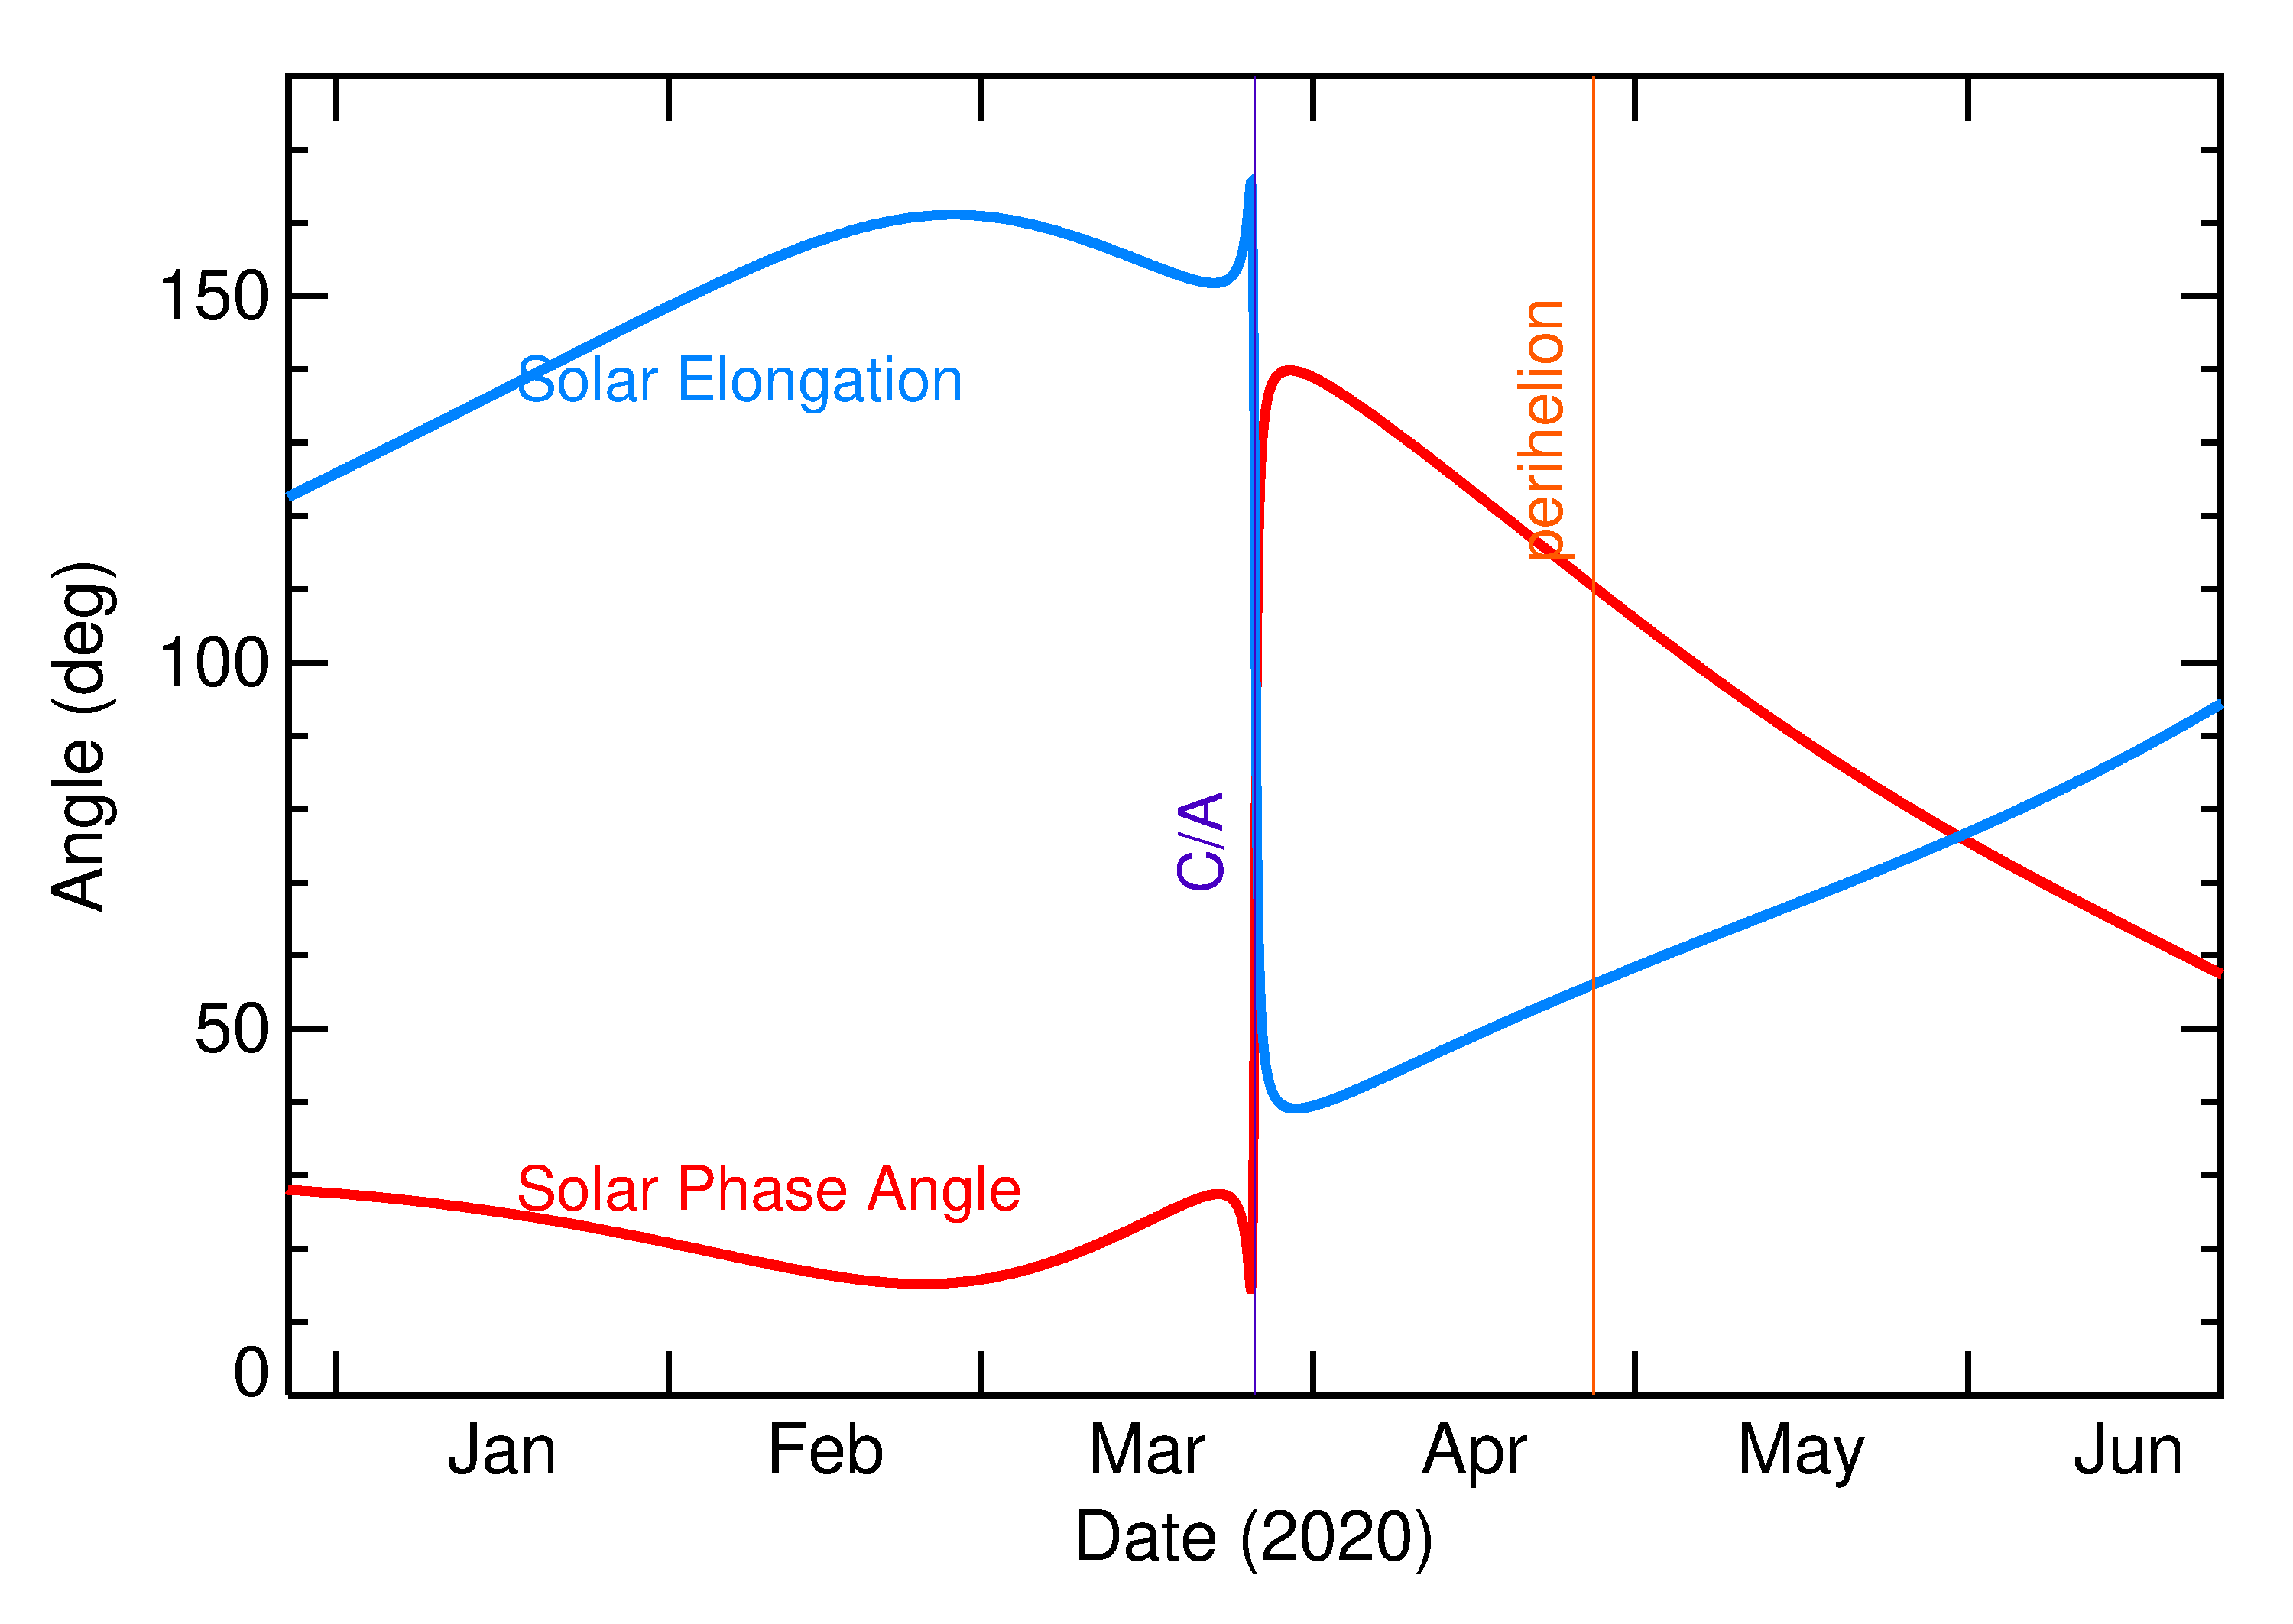 Solar Elongation and Solar Phase Angle of 2020 FJ4 in the months around closest approach